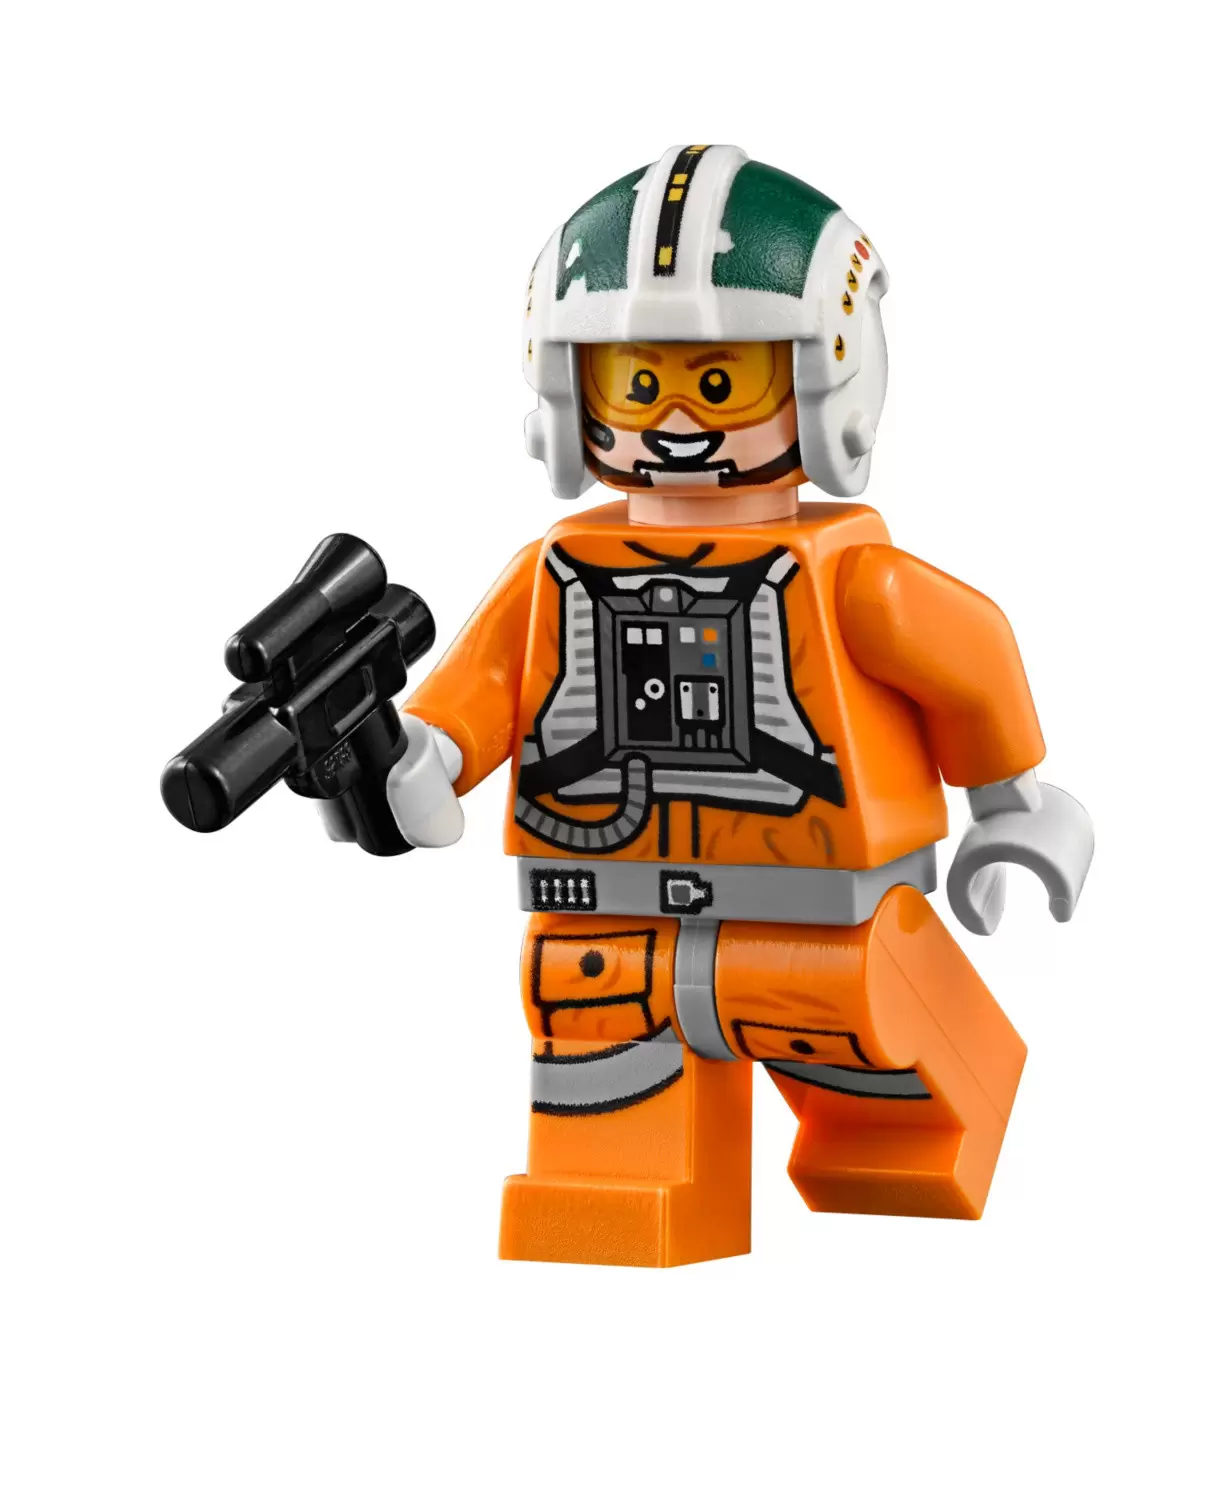 LEGO Star Wars Minifigs - Wedge Antilles